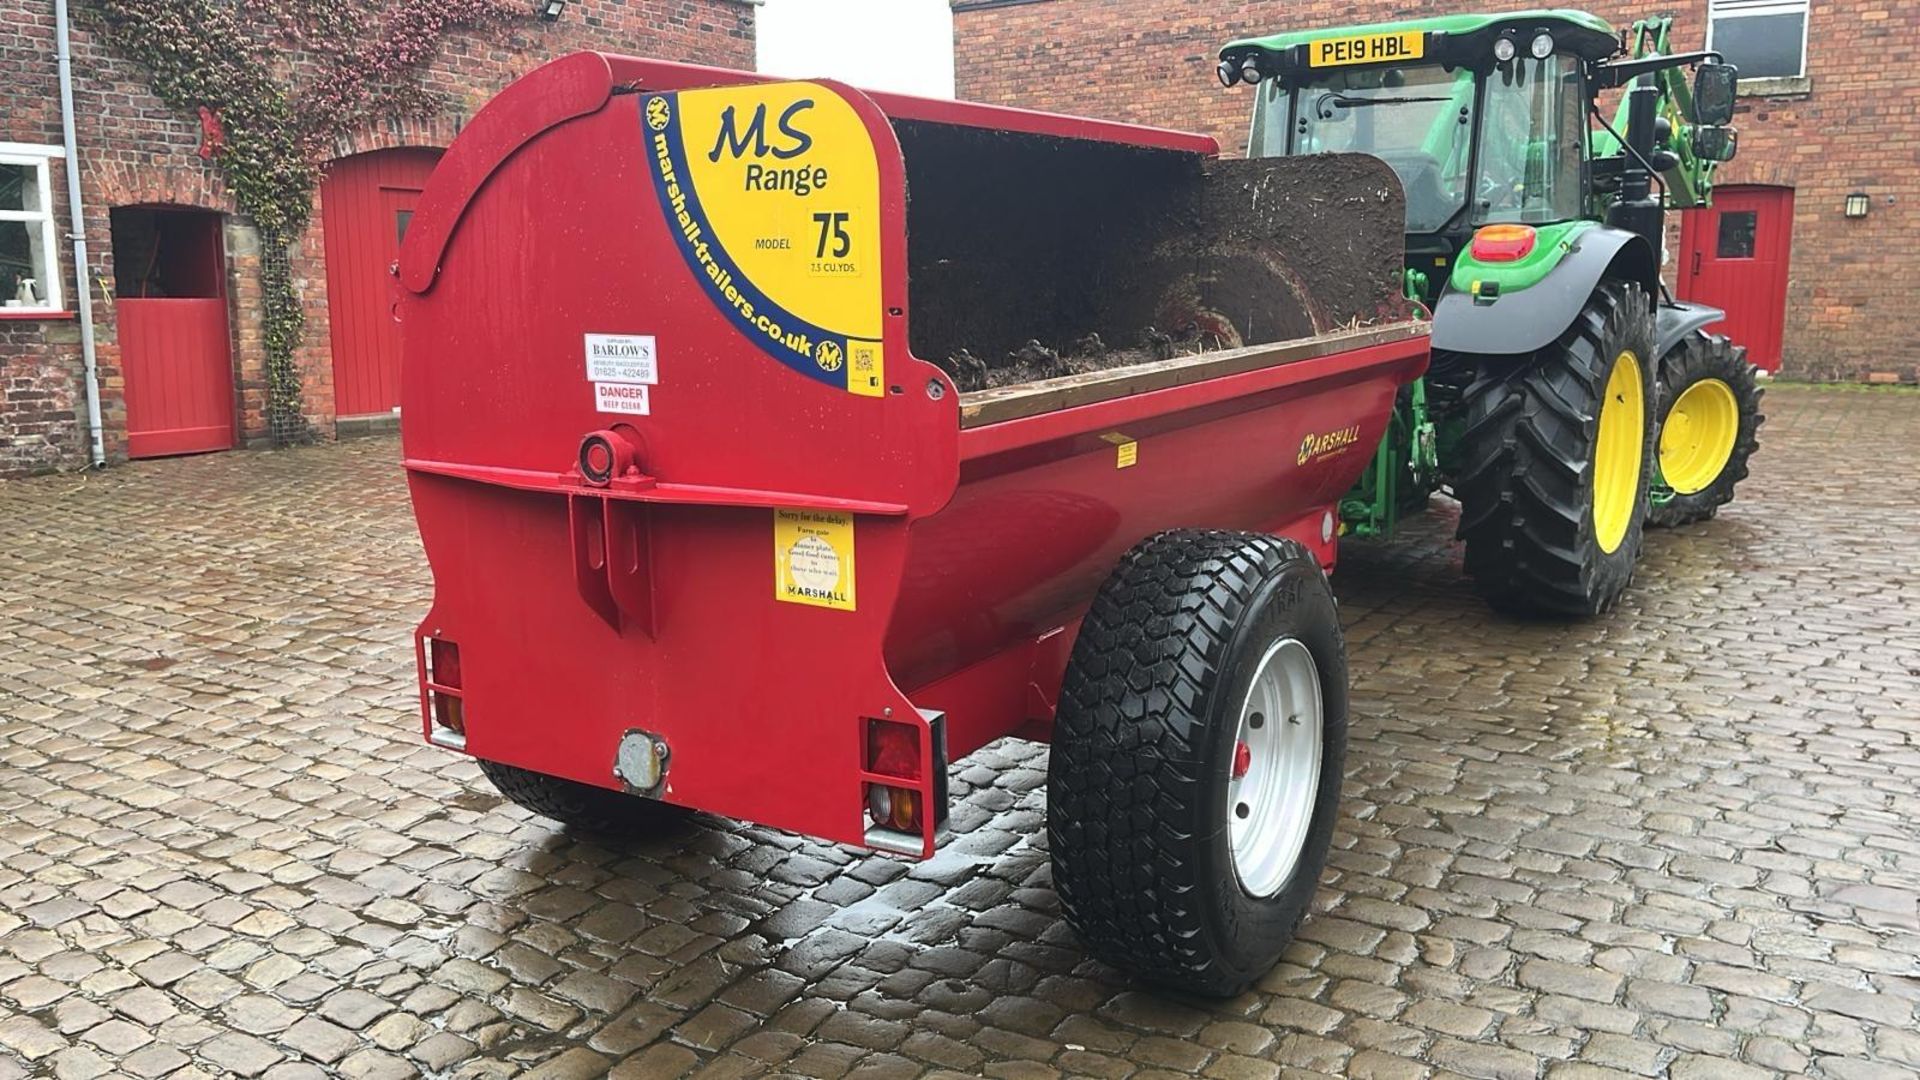 2016 MARSHALL MS 75 ROTARY MANURE SPREADER 7.5 CUBIC YARDS CARRYING CAPACITY 5 TONNE SERIAL NUMBER - Image 2 of 13